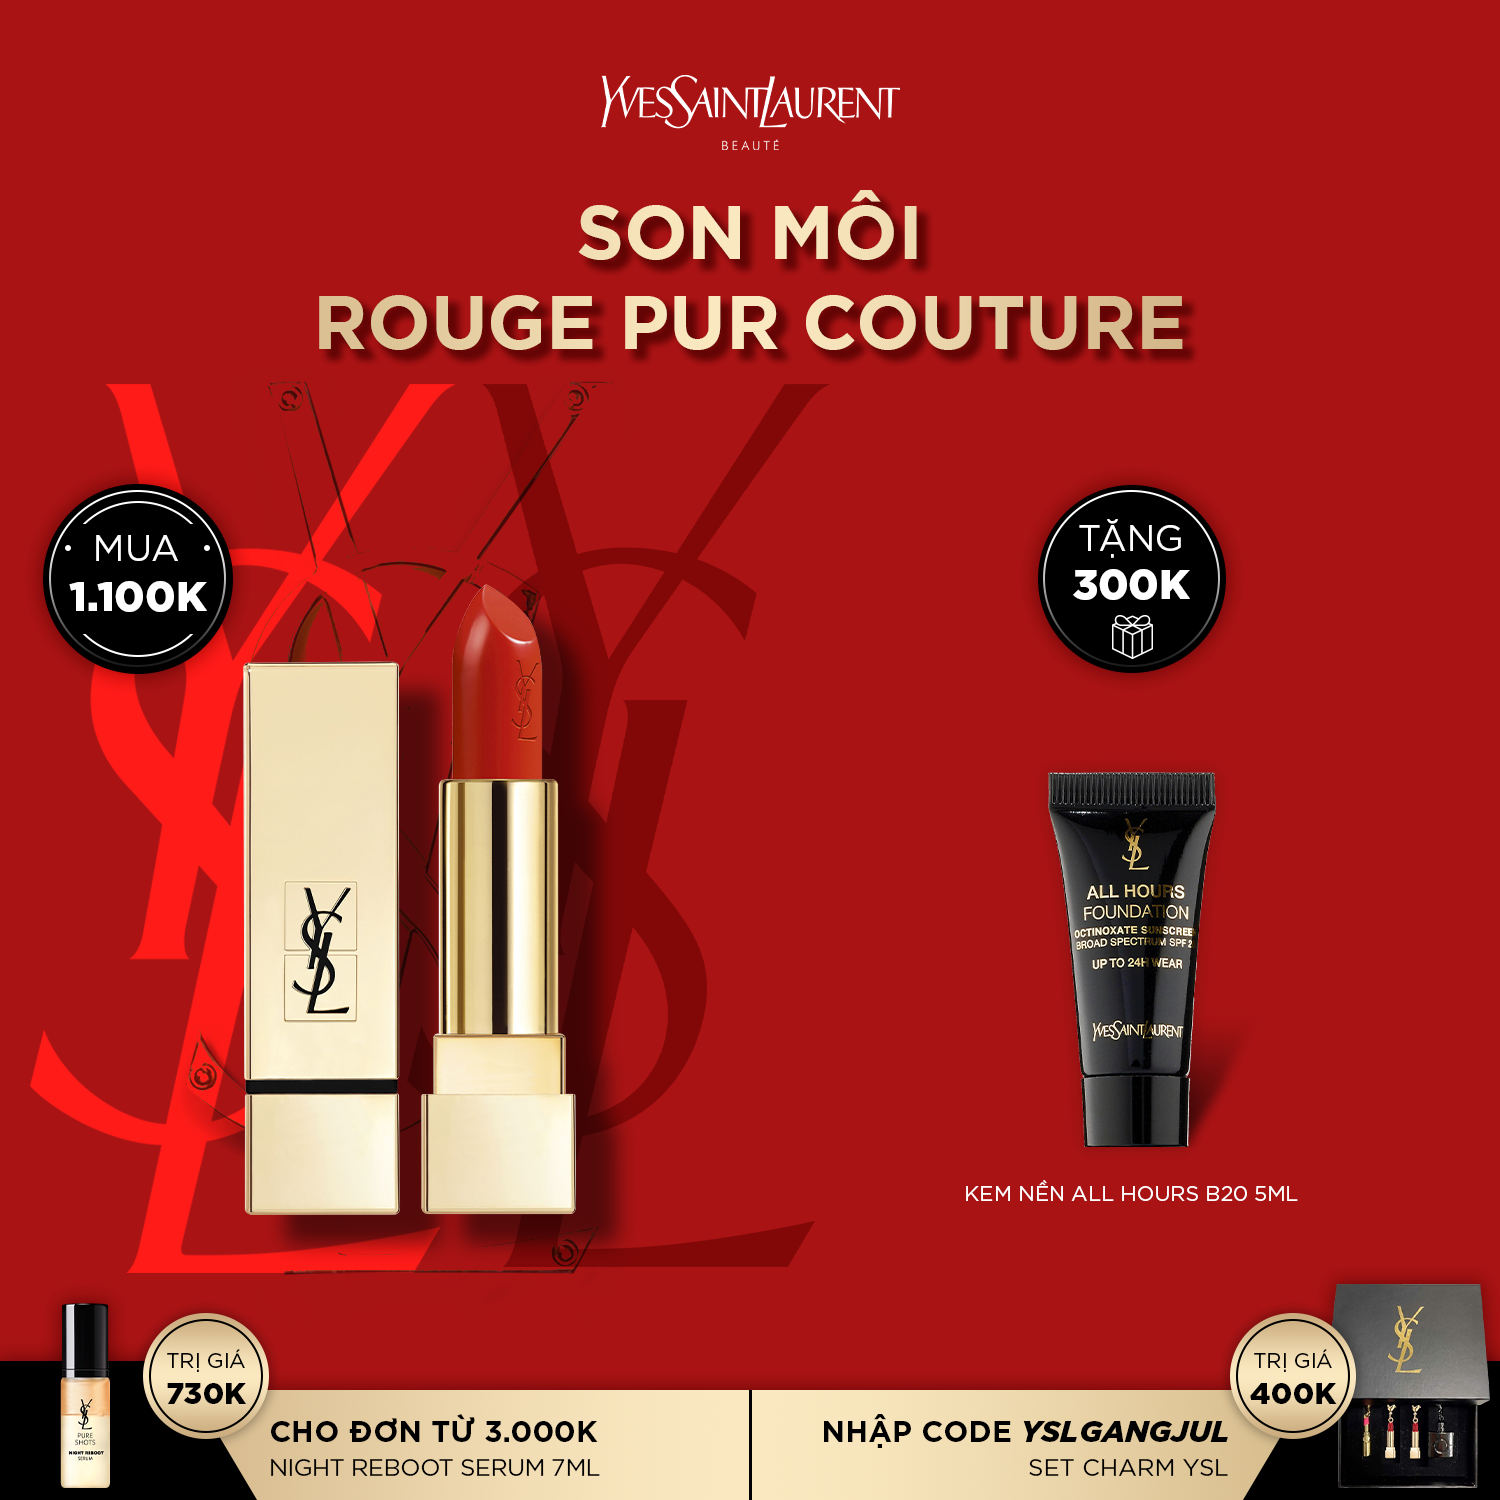 [LIPS] Son môi Rouge Pur Couture